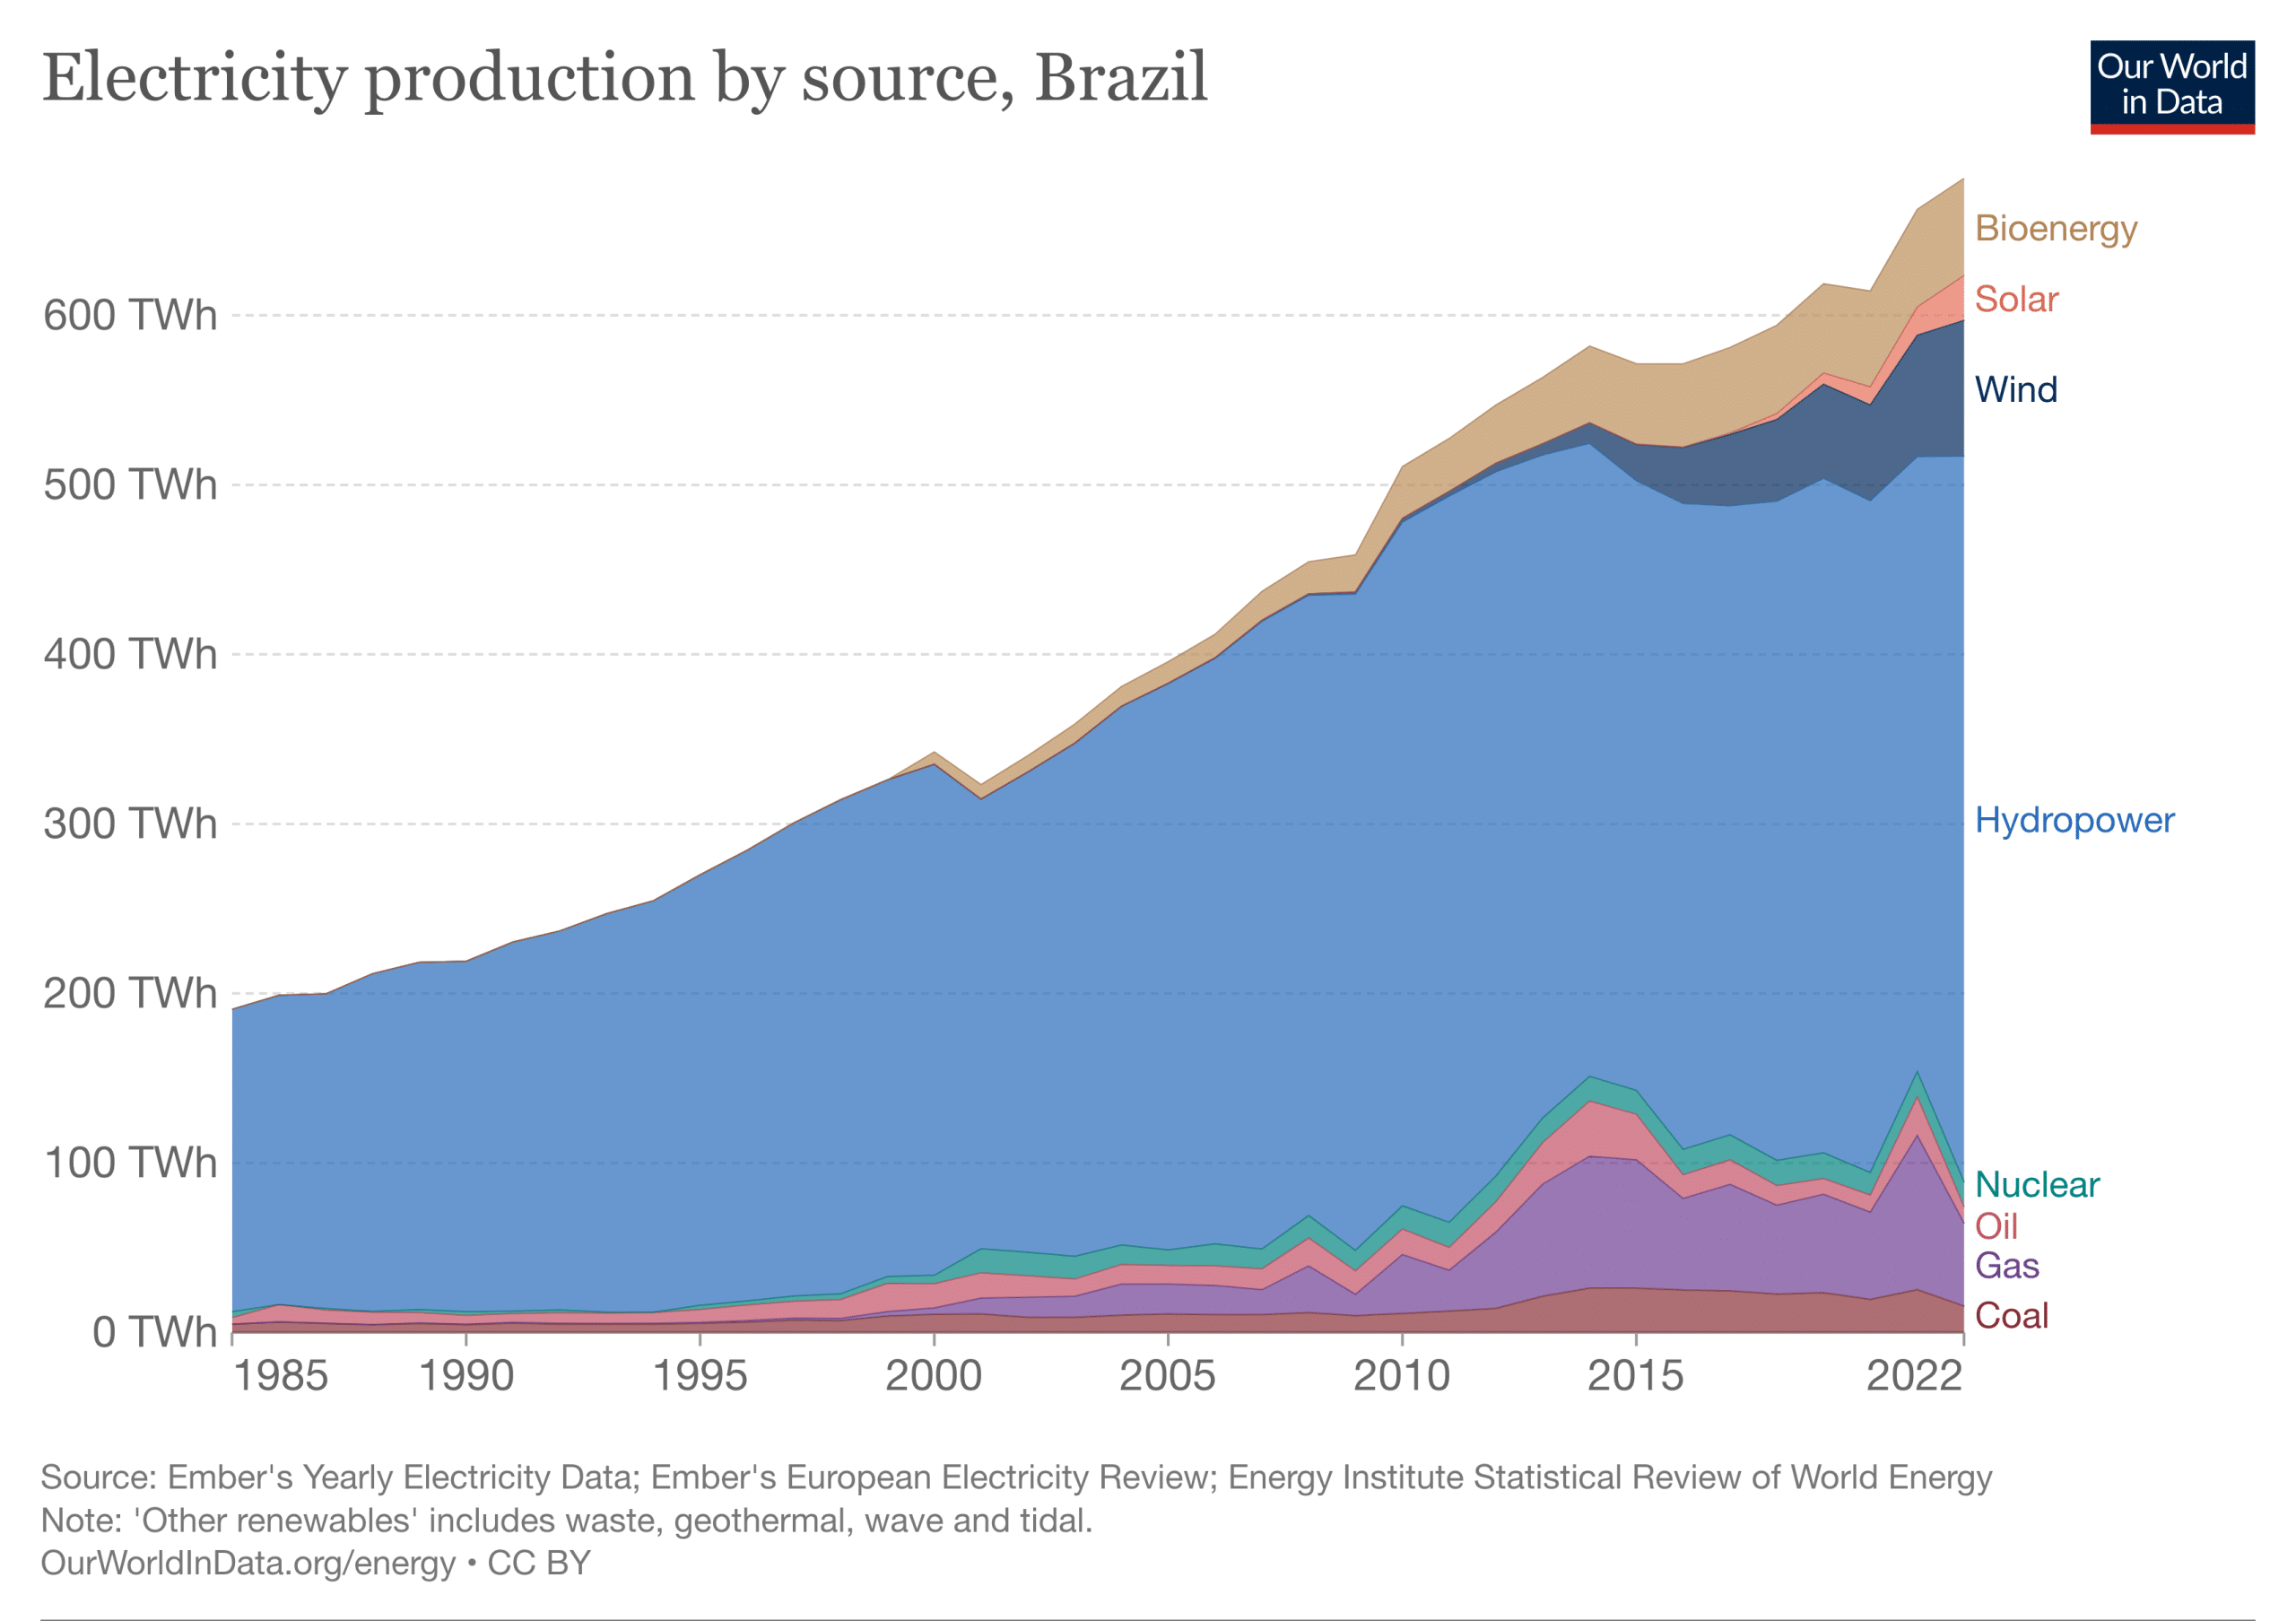 Share of electricity production by source, Brazil Our world in data